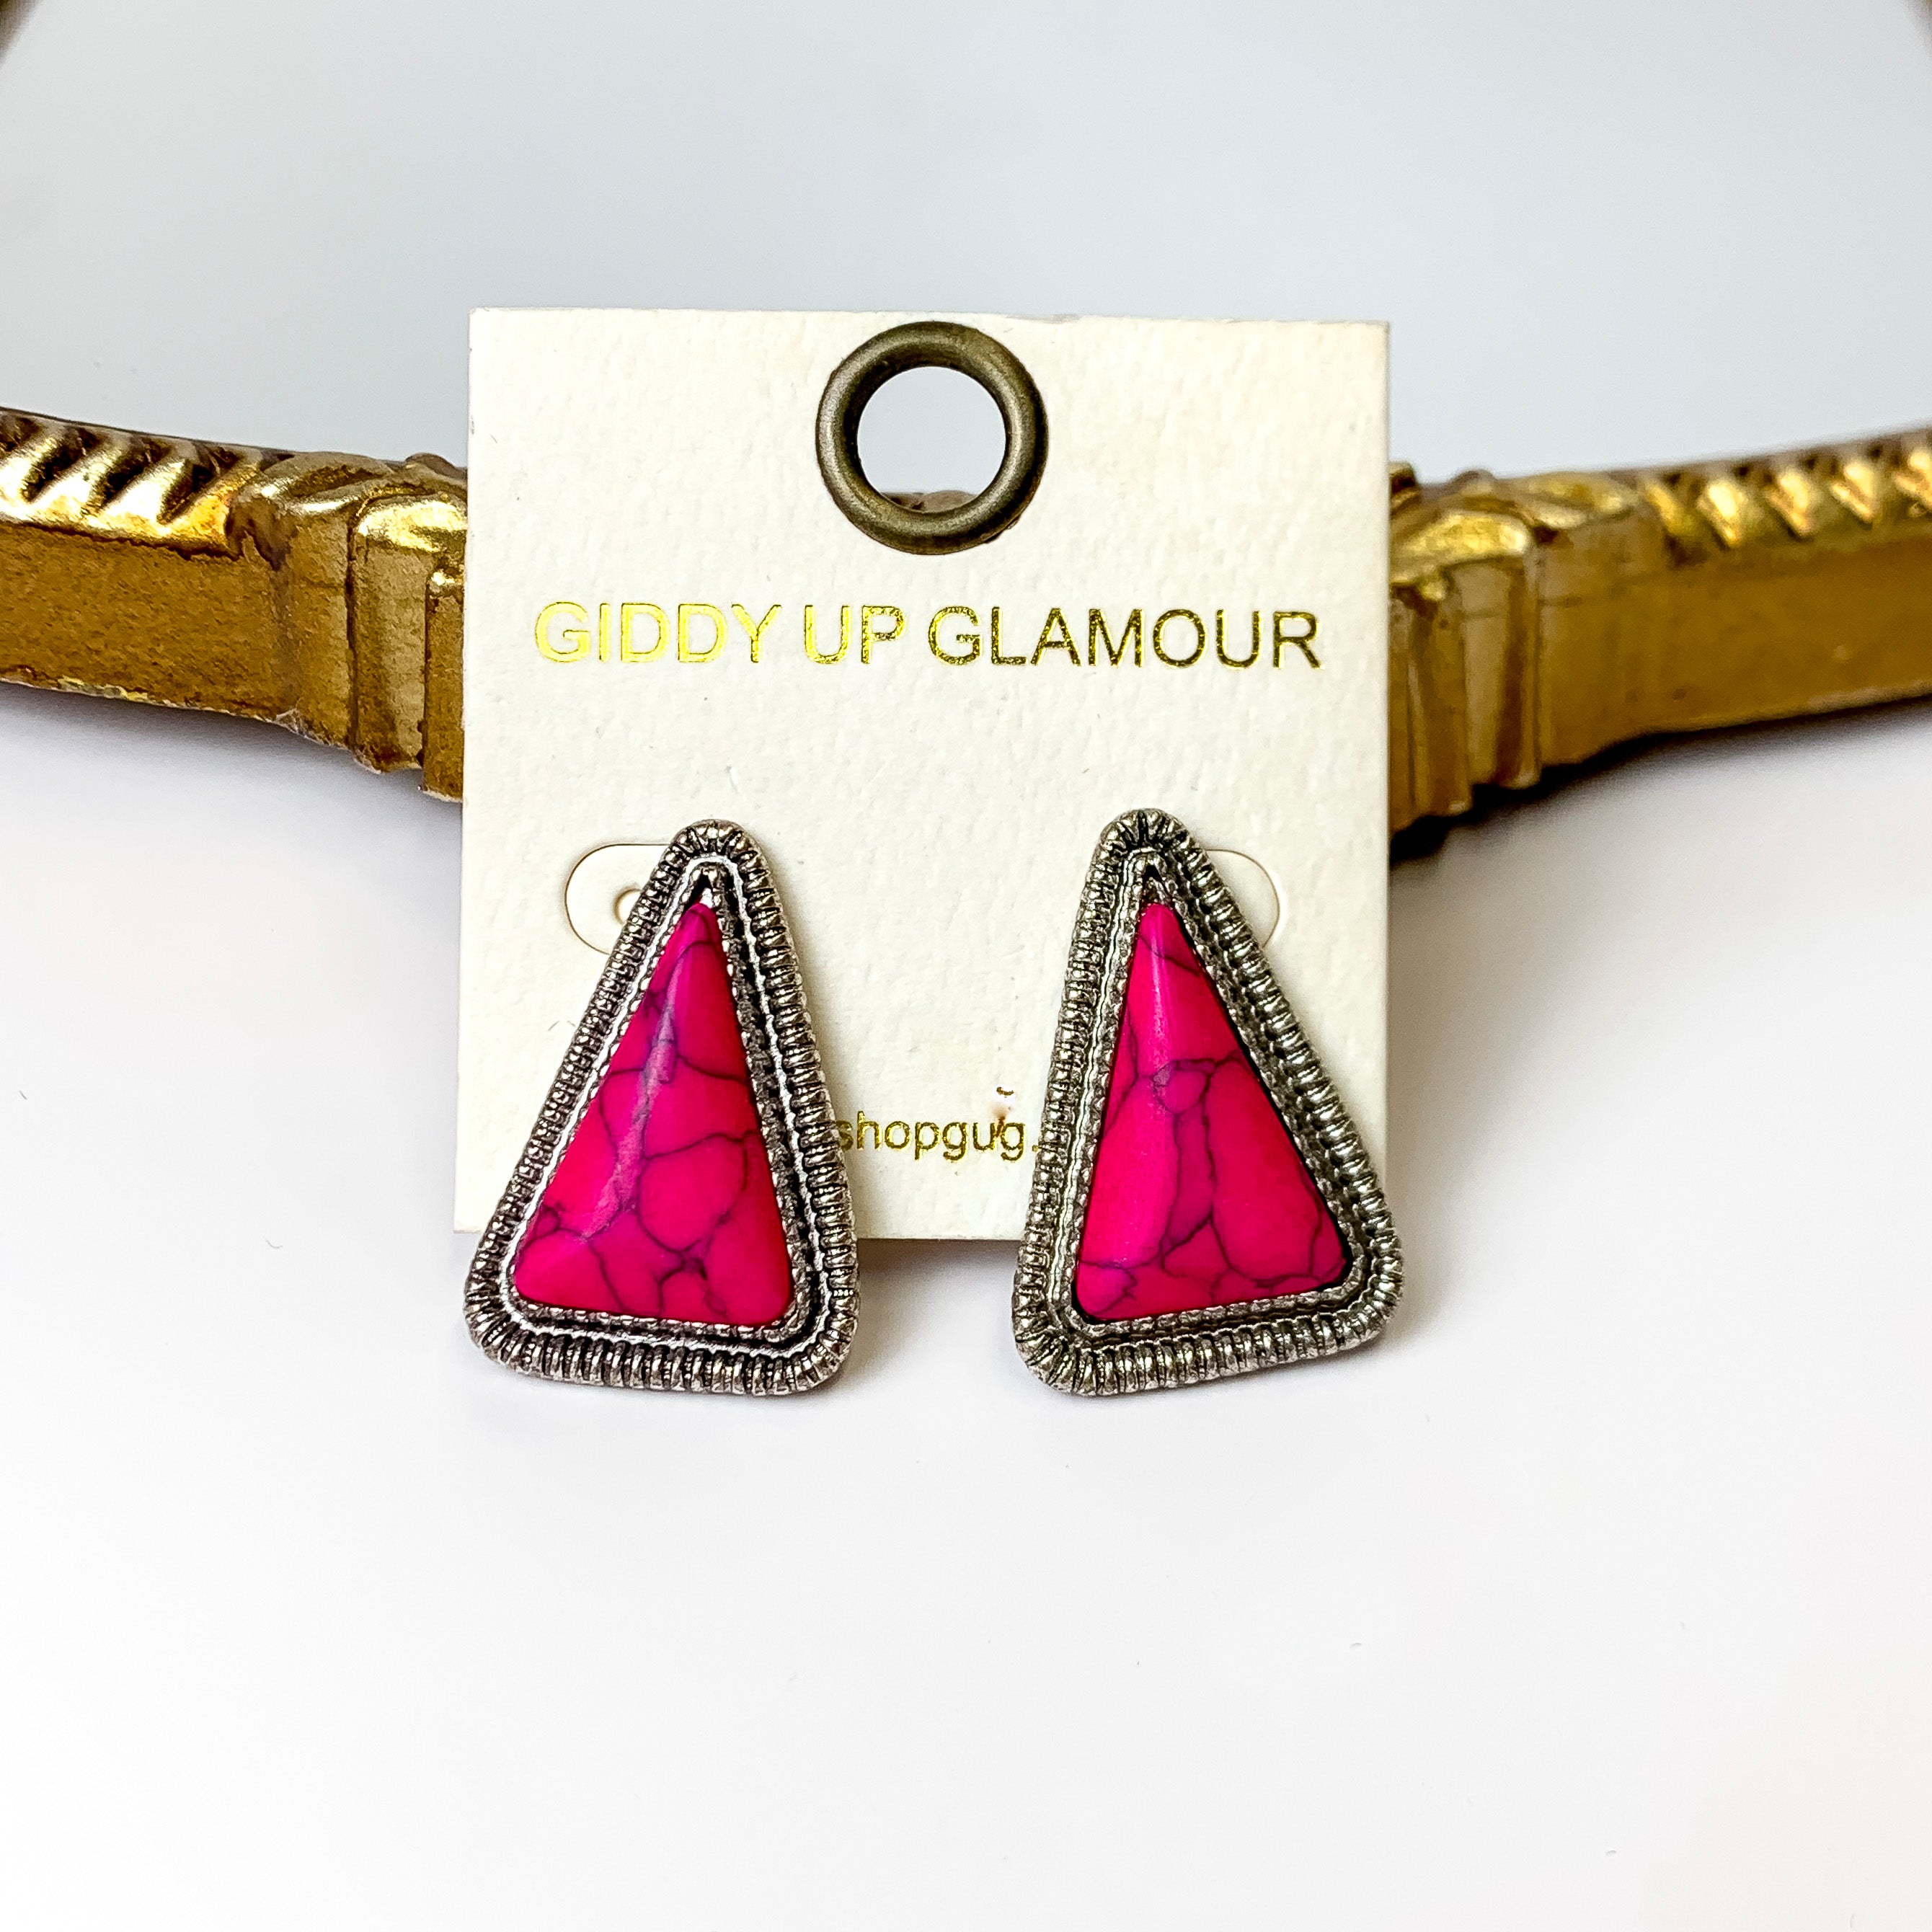 Western Silver Tone Faux Triangle Stone Earrings in Fuchsia Pink - Giddy Up Glamour Boutique